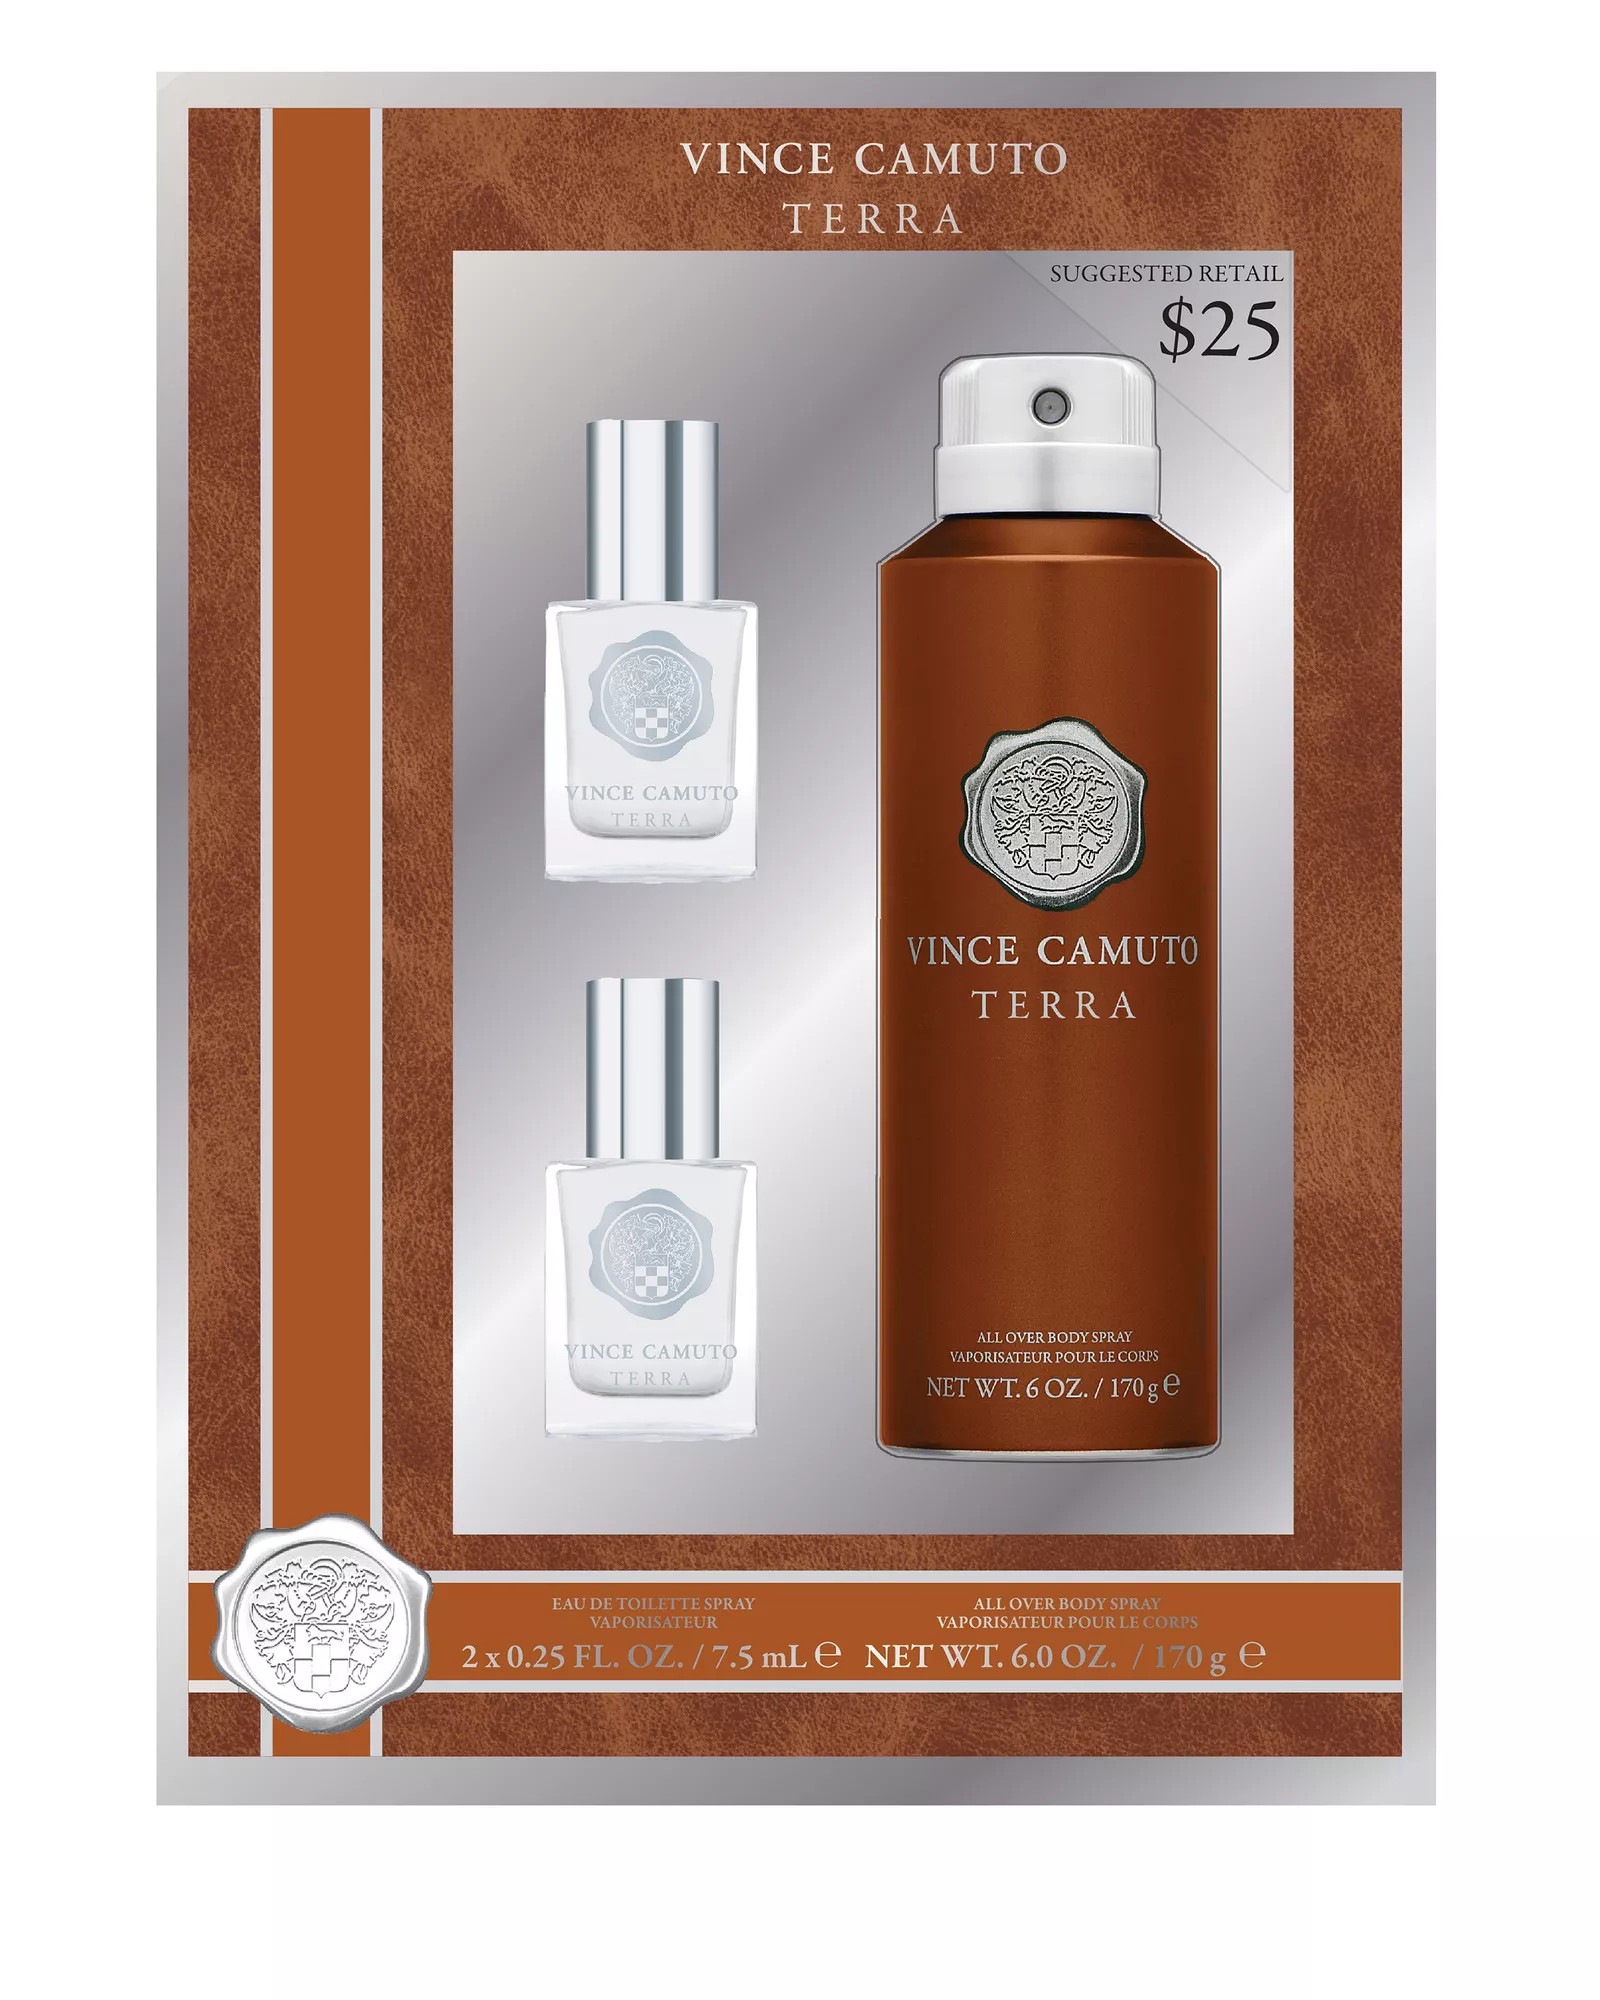 Vince Camuto Terra Extreme 2 PC Set for Men 3.4 oz Cologne and